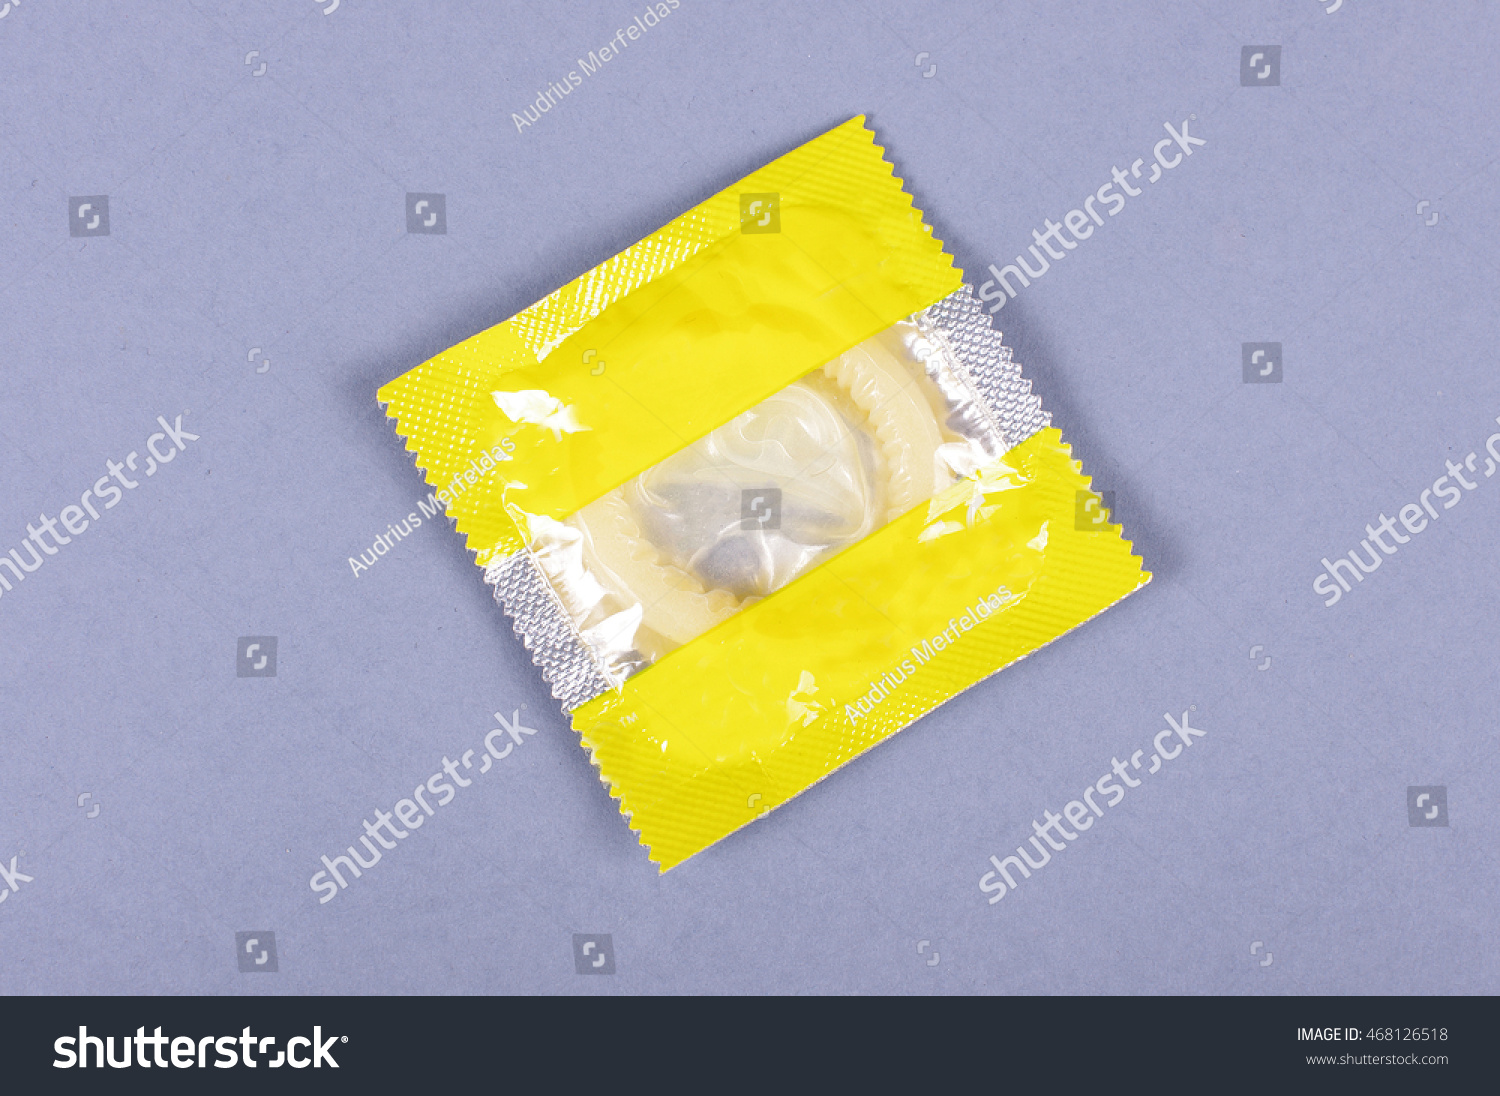 Download Condom Semi Transparent Yellow Wrapper Isolated Objects Stock Image 468126518 PSD Mockup Templates